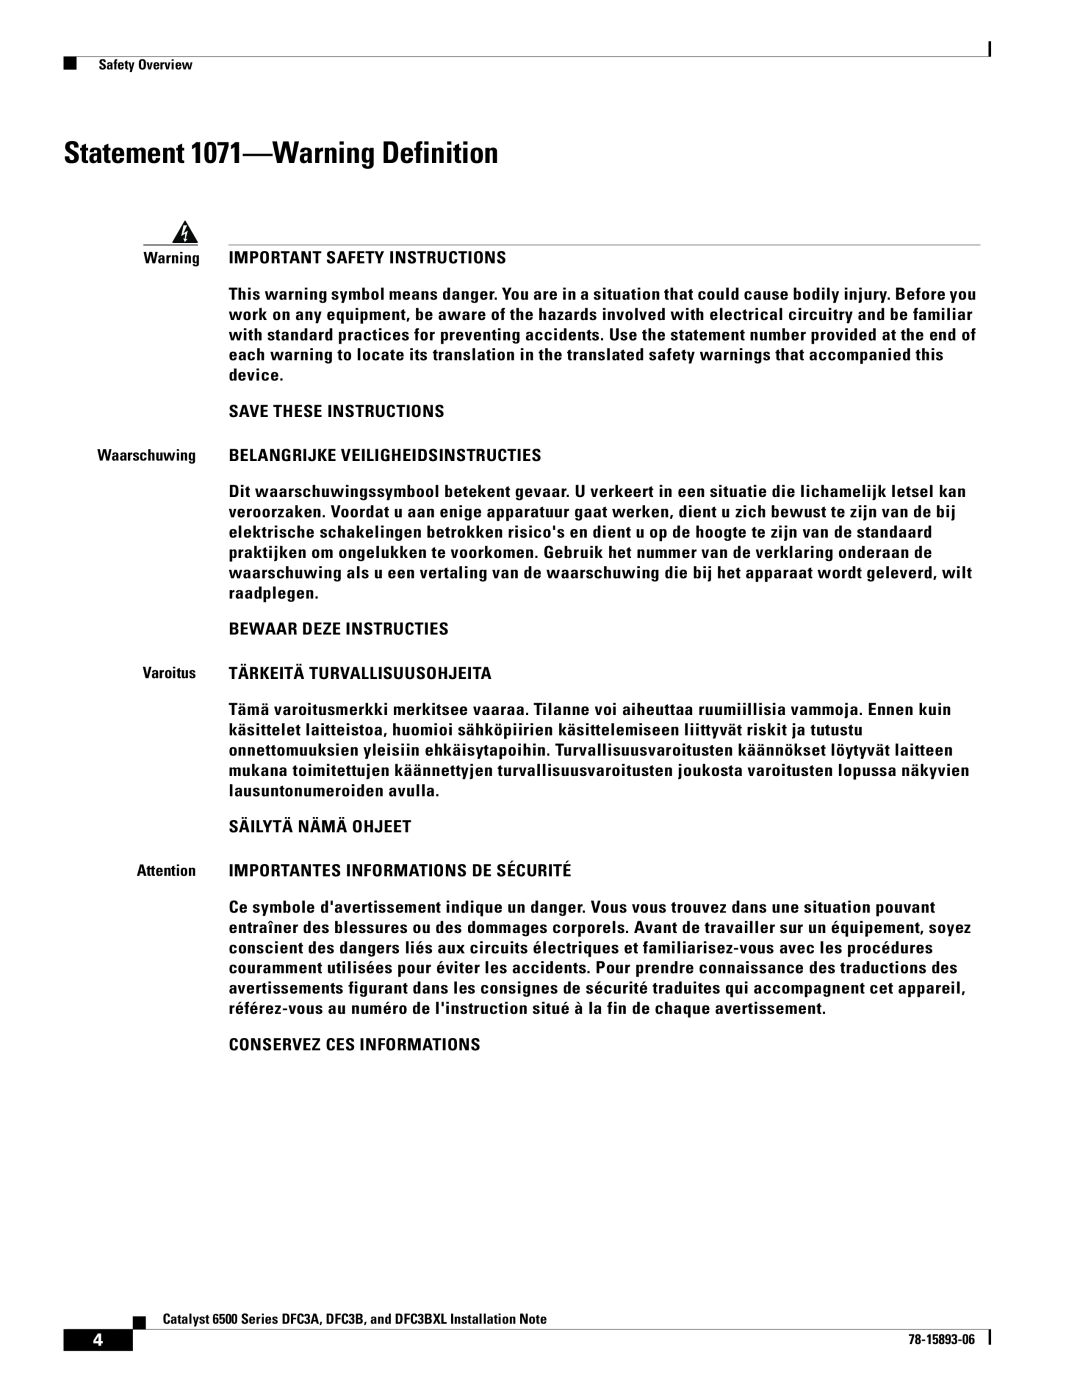 Cisco Systems DFC3BXL, DFC3A manual Statement 1071-Warning Definition 